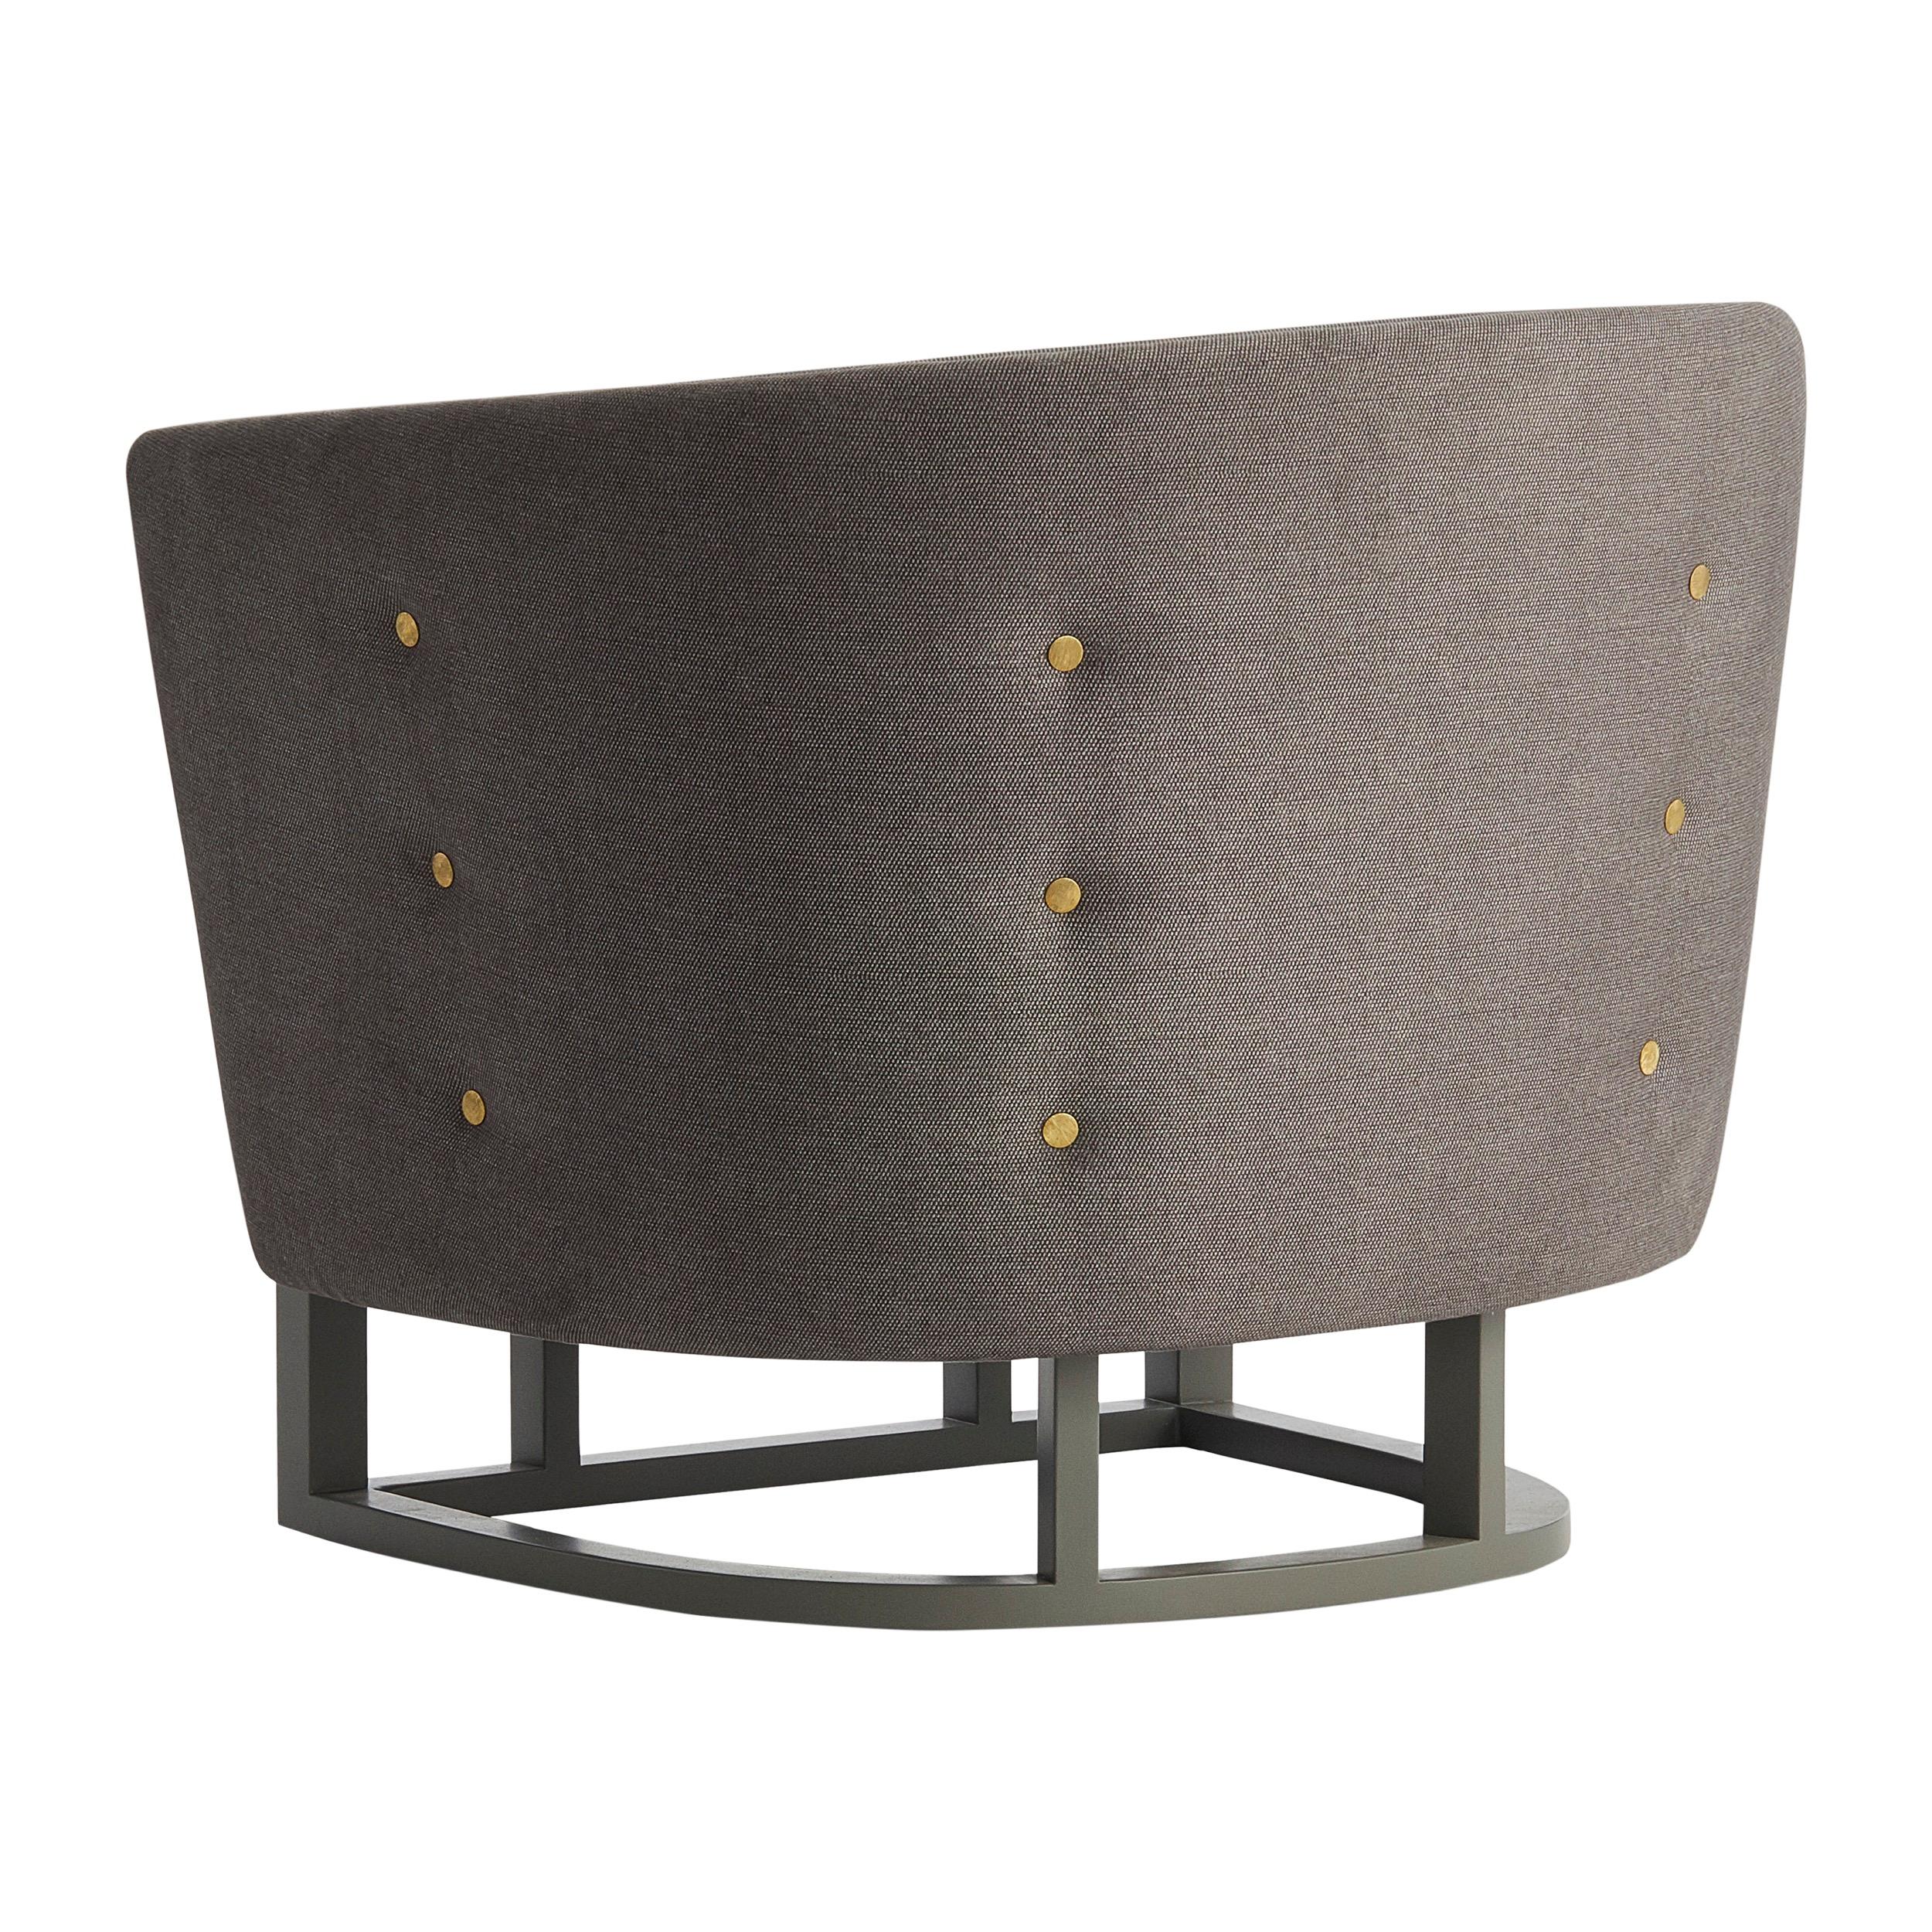 Very elegant, Classic and comfortable piece, suitable for any living room decor.

Upholstered with Grey Bella 280 with matte lacquered base in S6502-Y color.